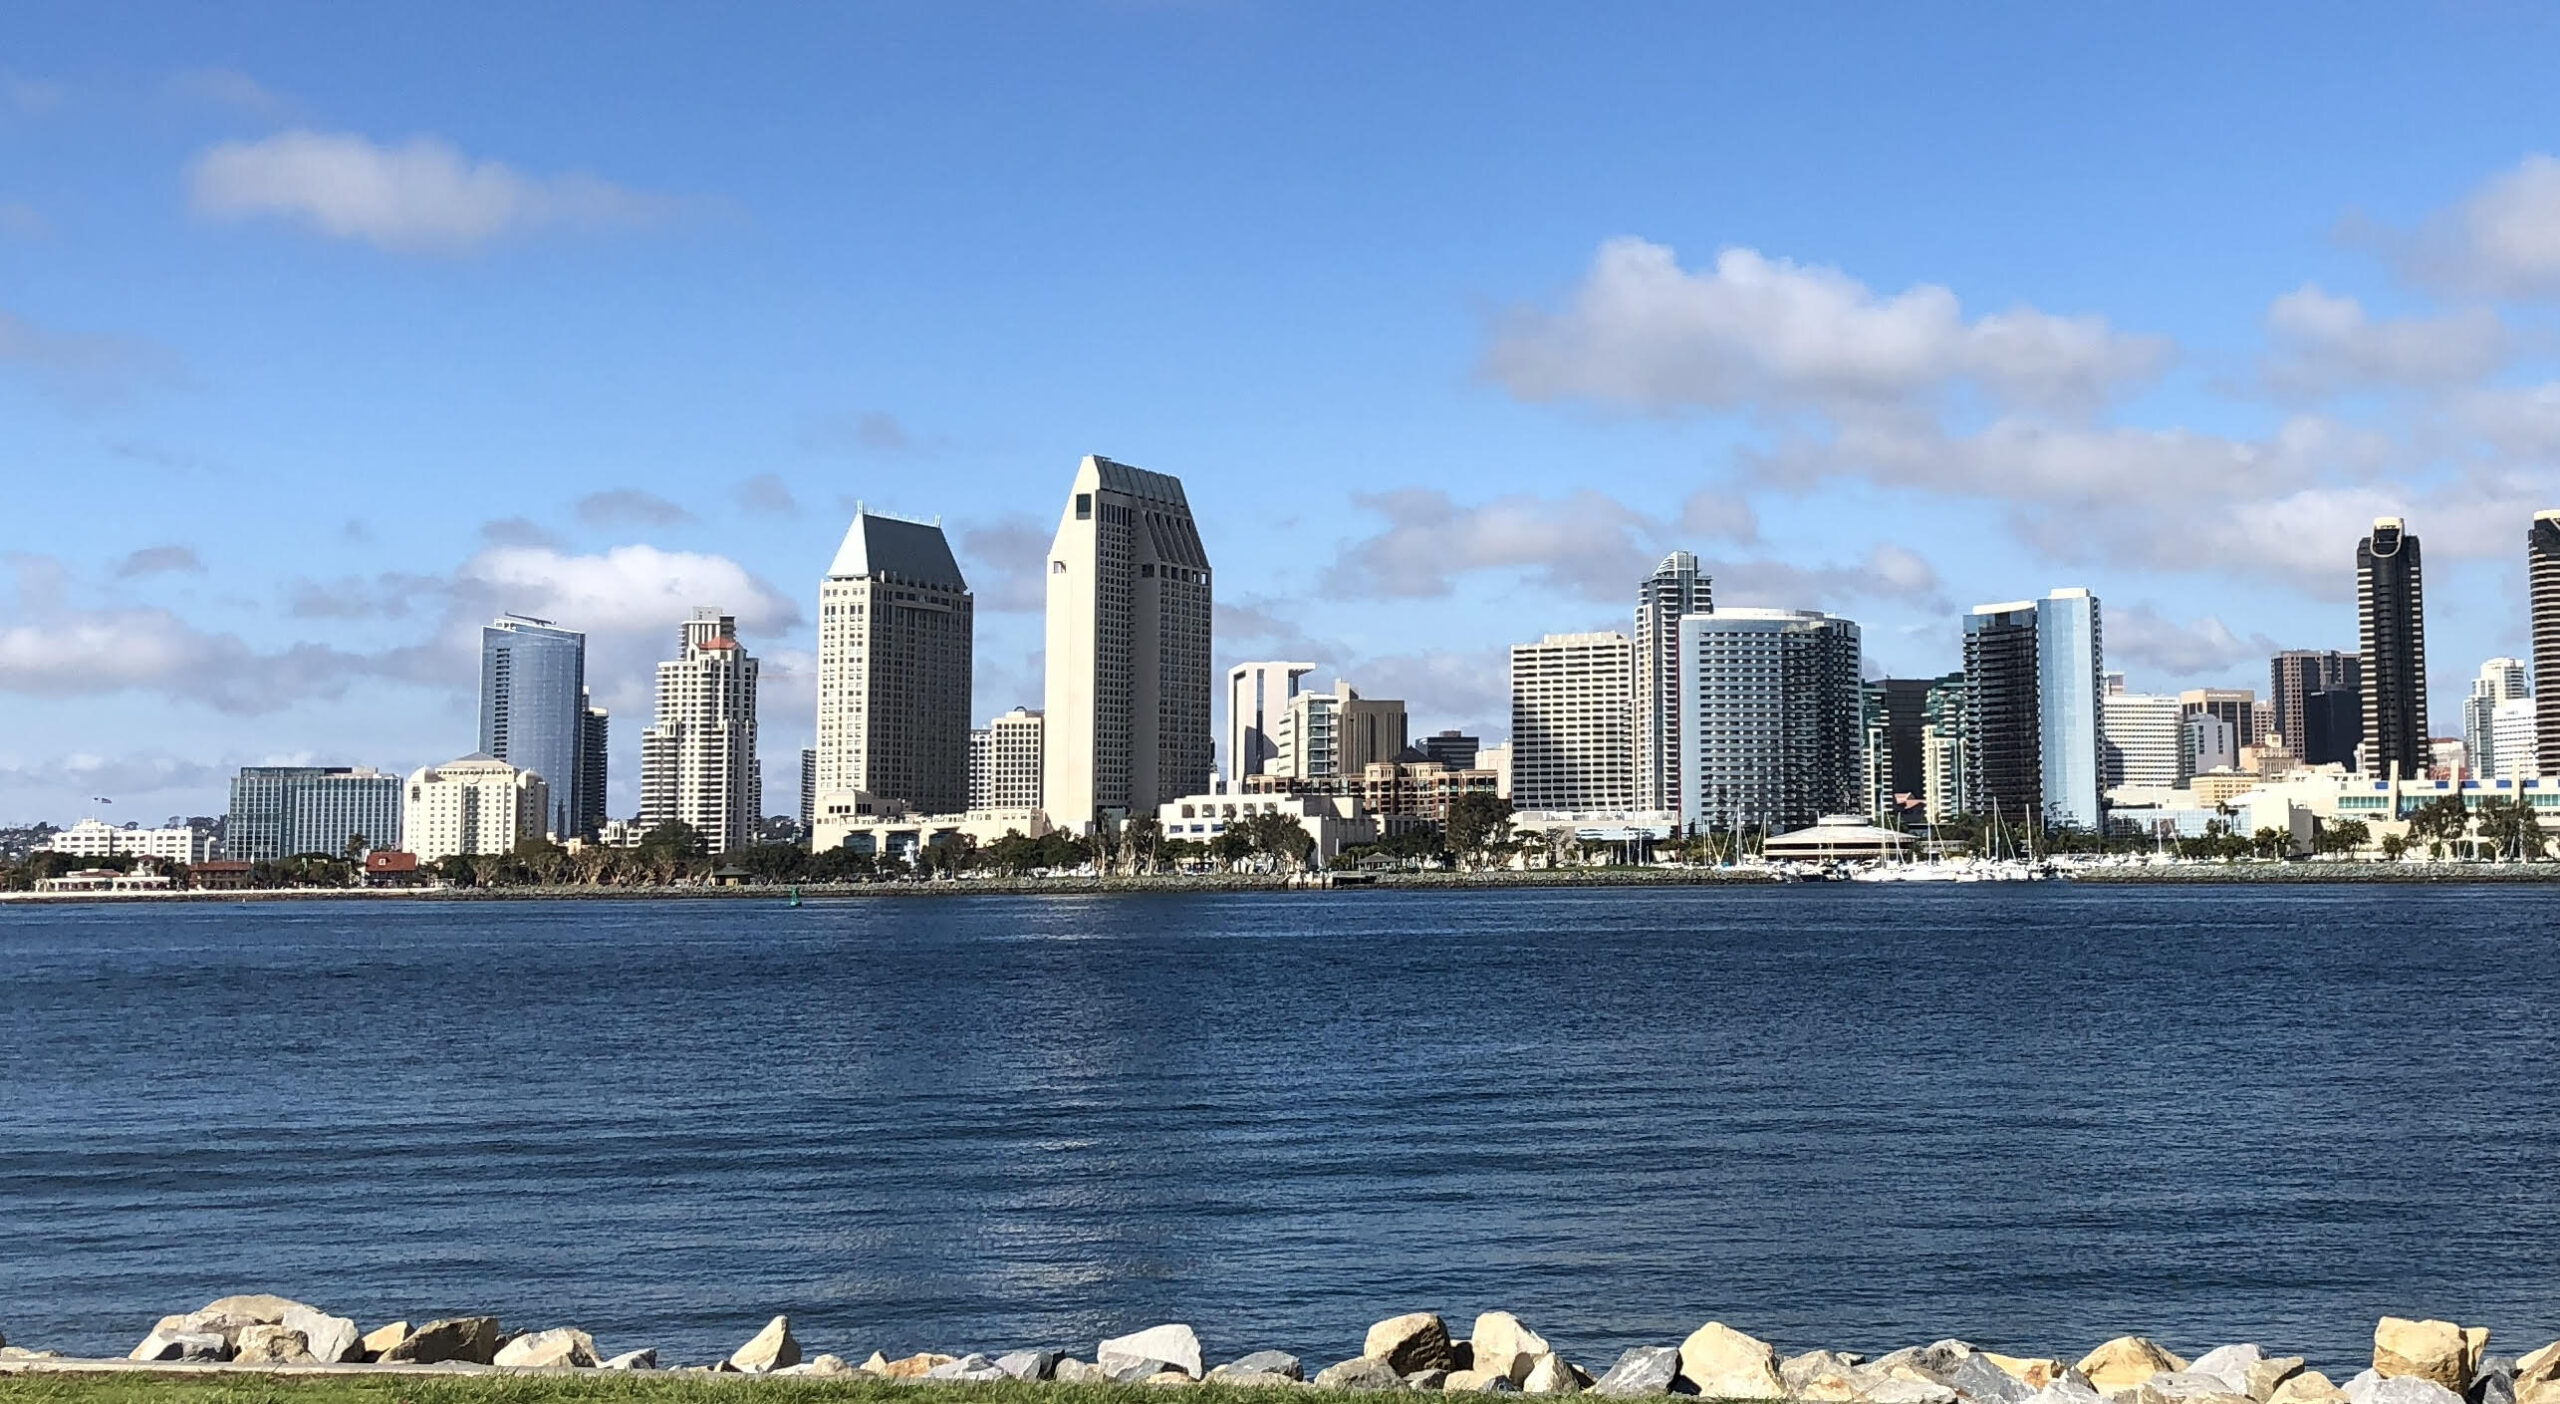 San Diego: 10 things to do for under $15 